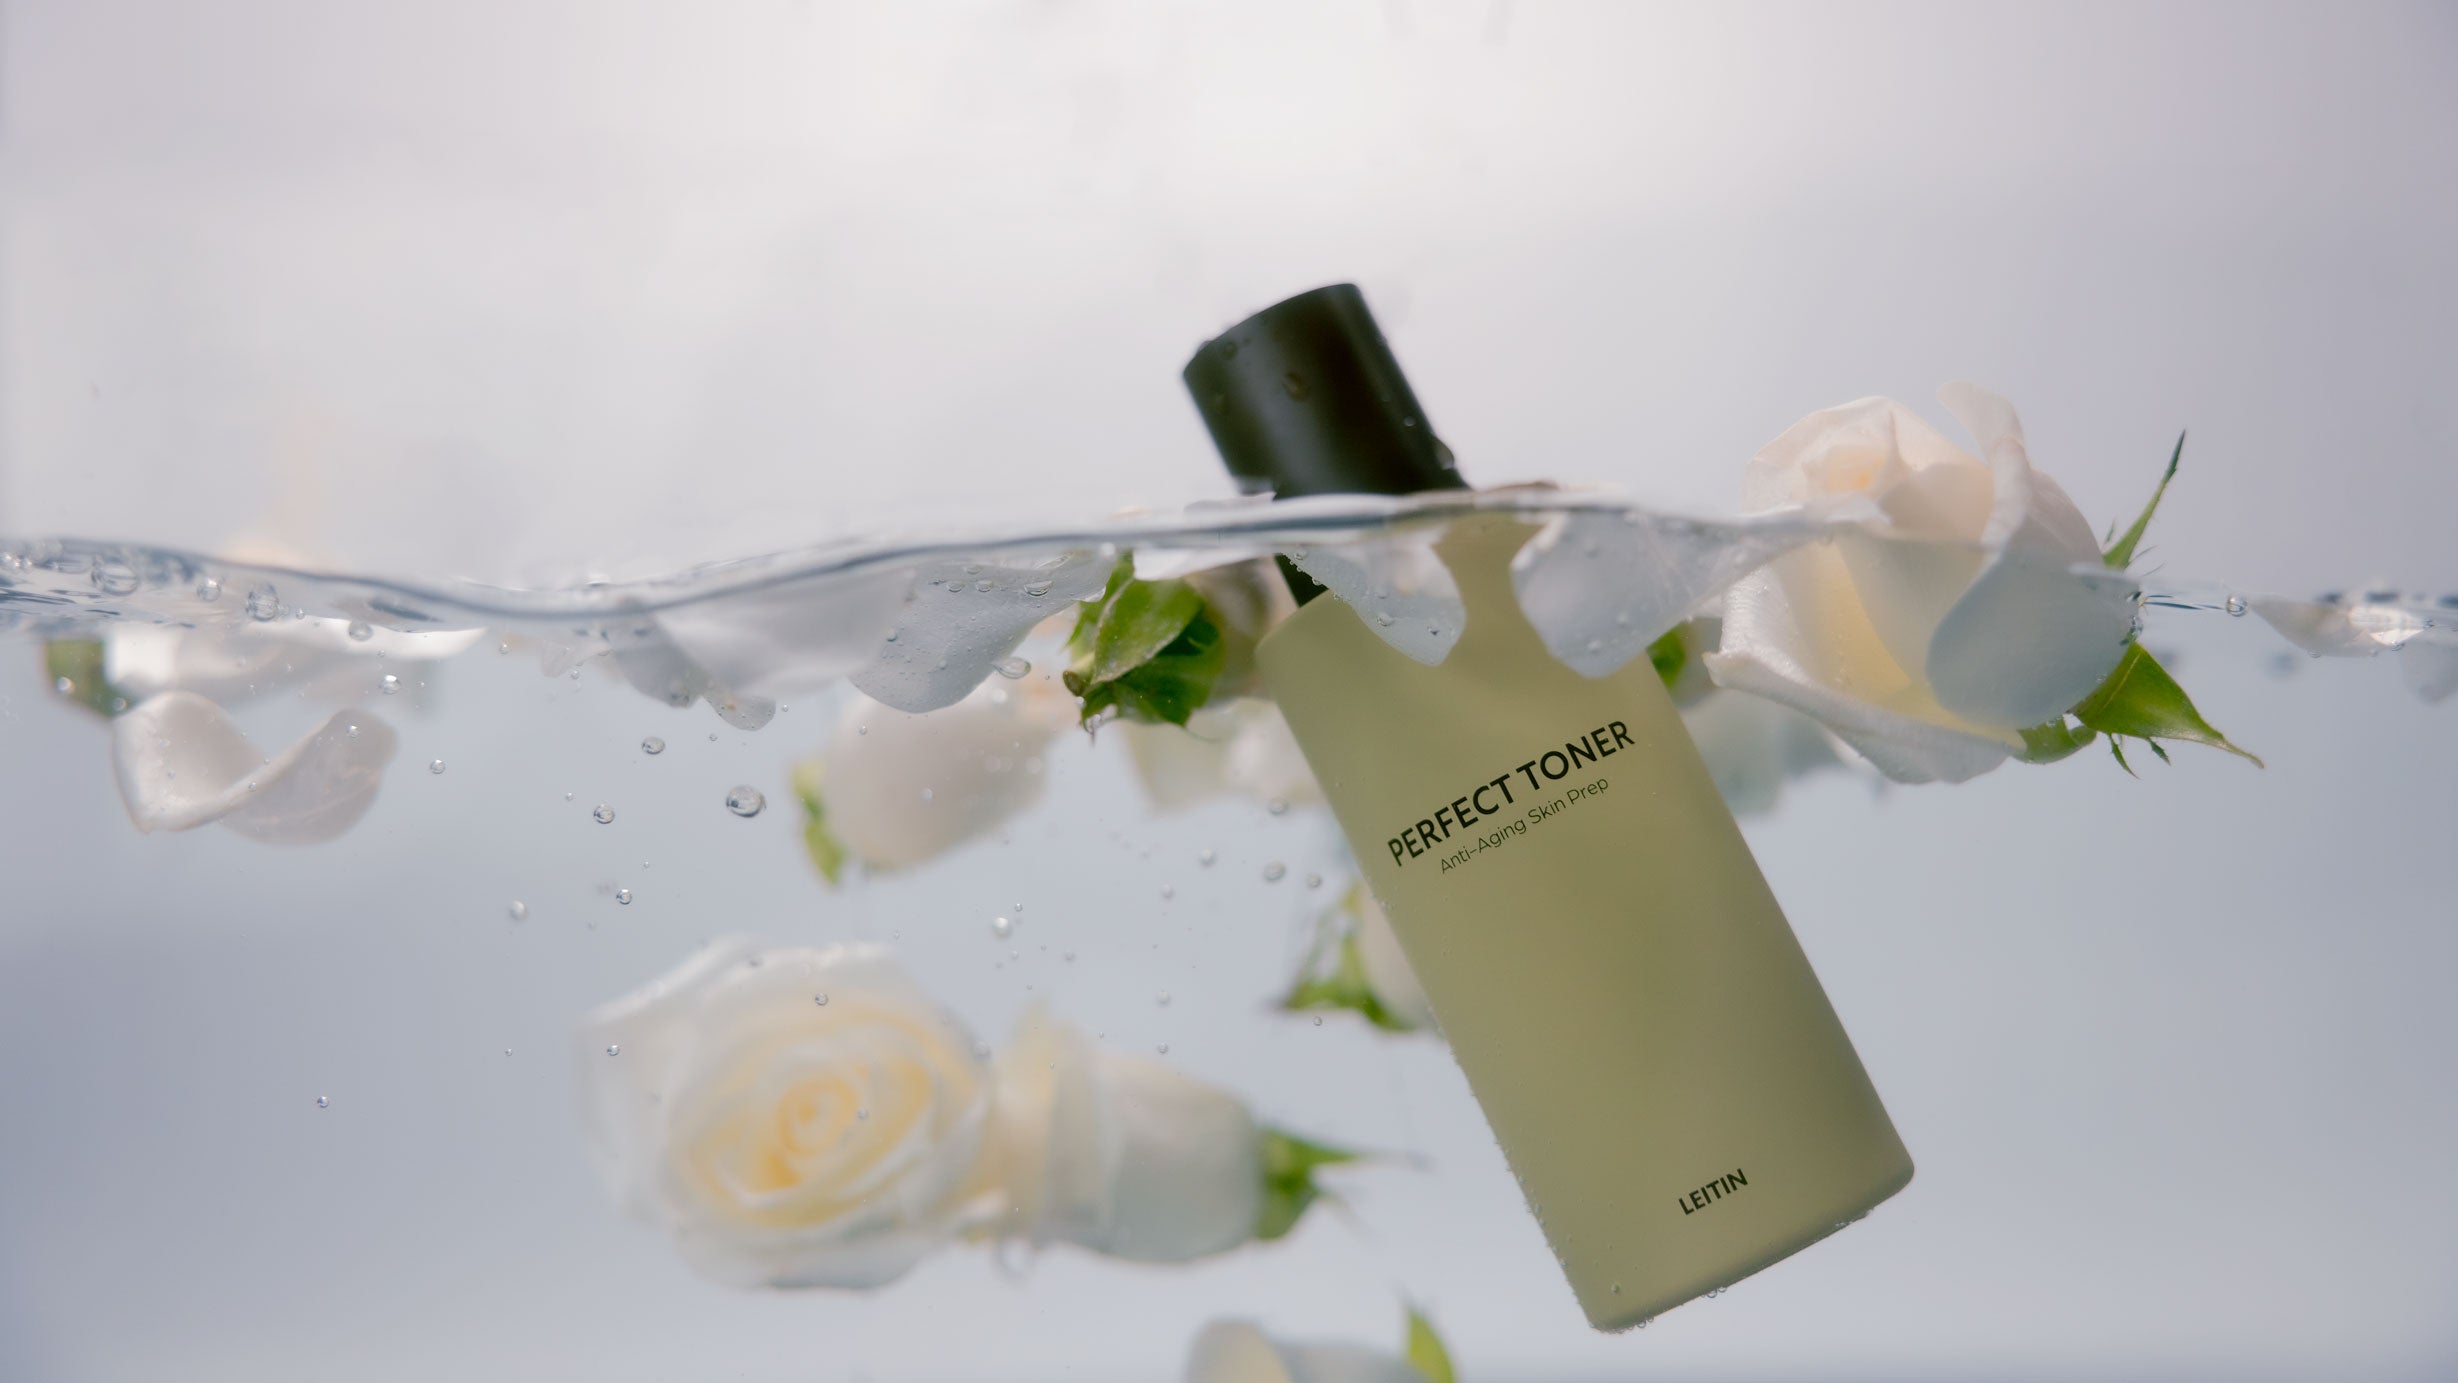 Image of LEITIN Skincare's Perfect Toner submerged in water and white roses.